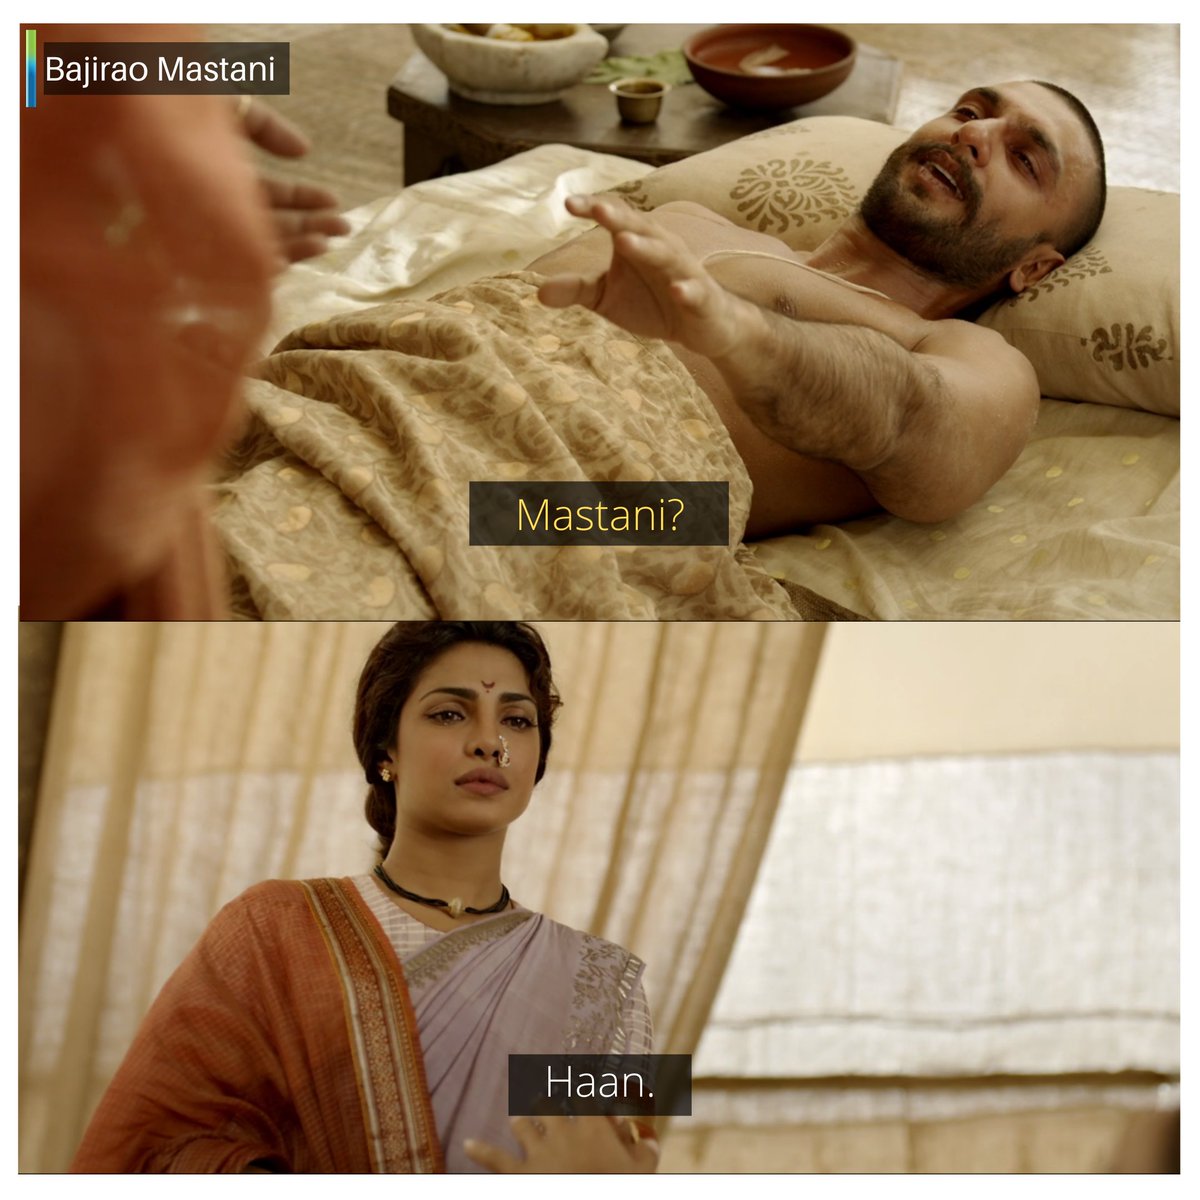 Yet she chooses, in a heart-wrenching scene, to let her husband mistake her for Mastani as he lays dying. (7/10)